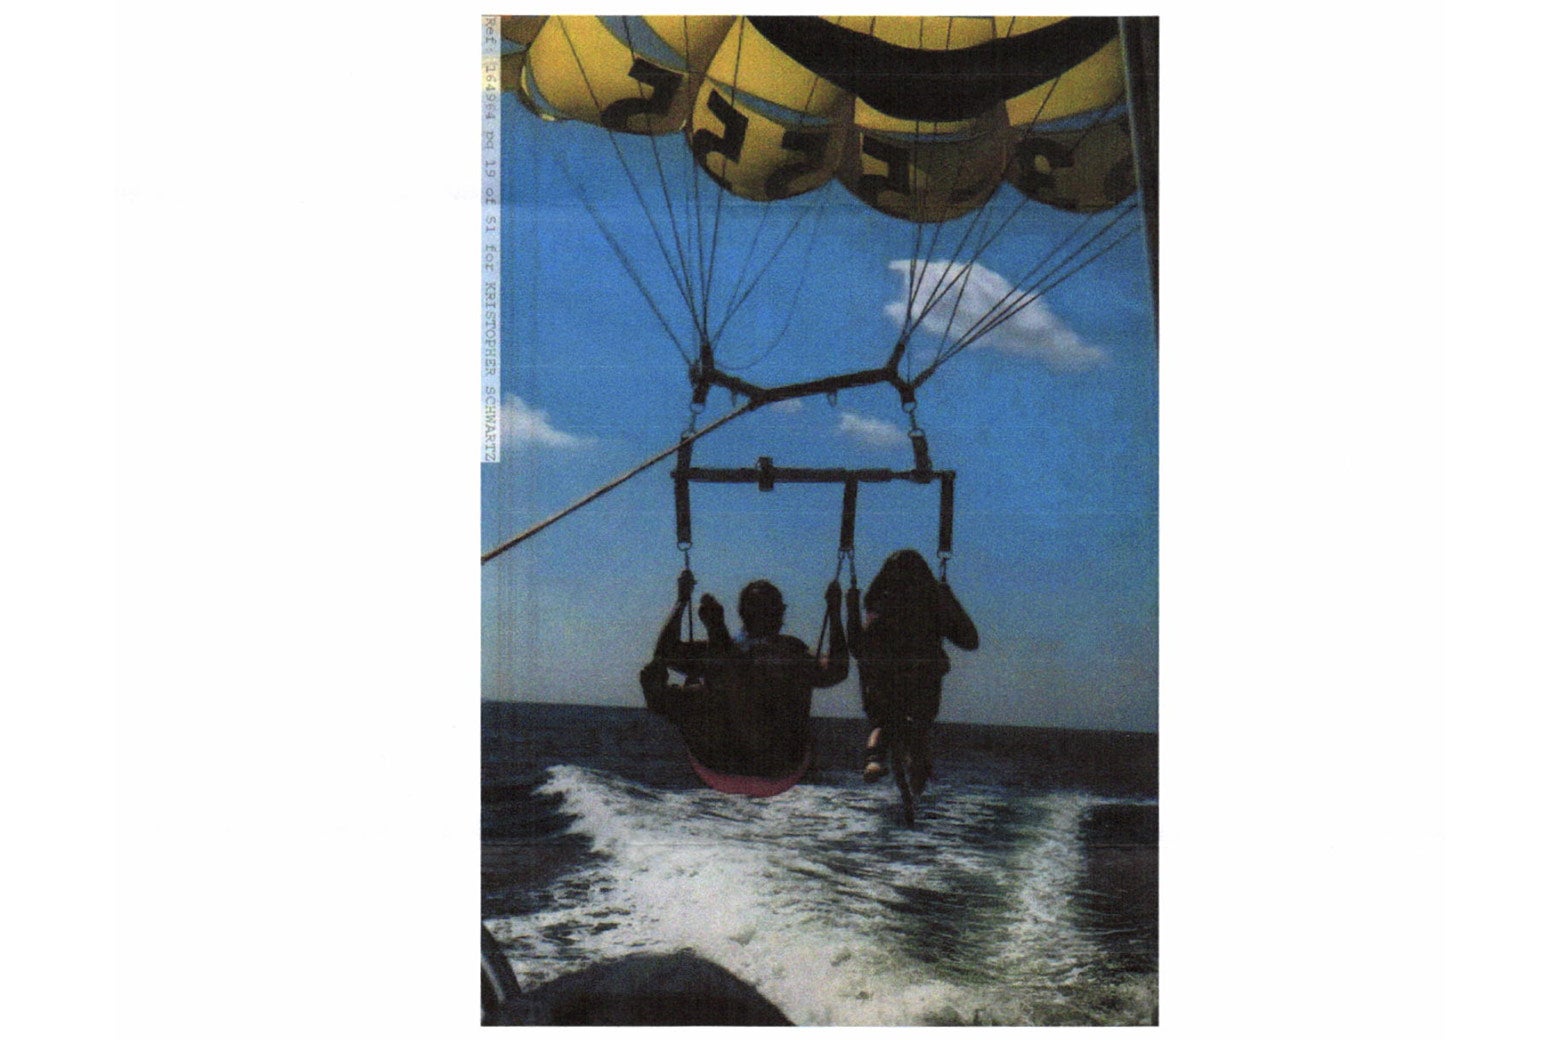 A scanned photo sent to Robert Pezzeca of a family member paragliding.